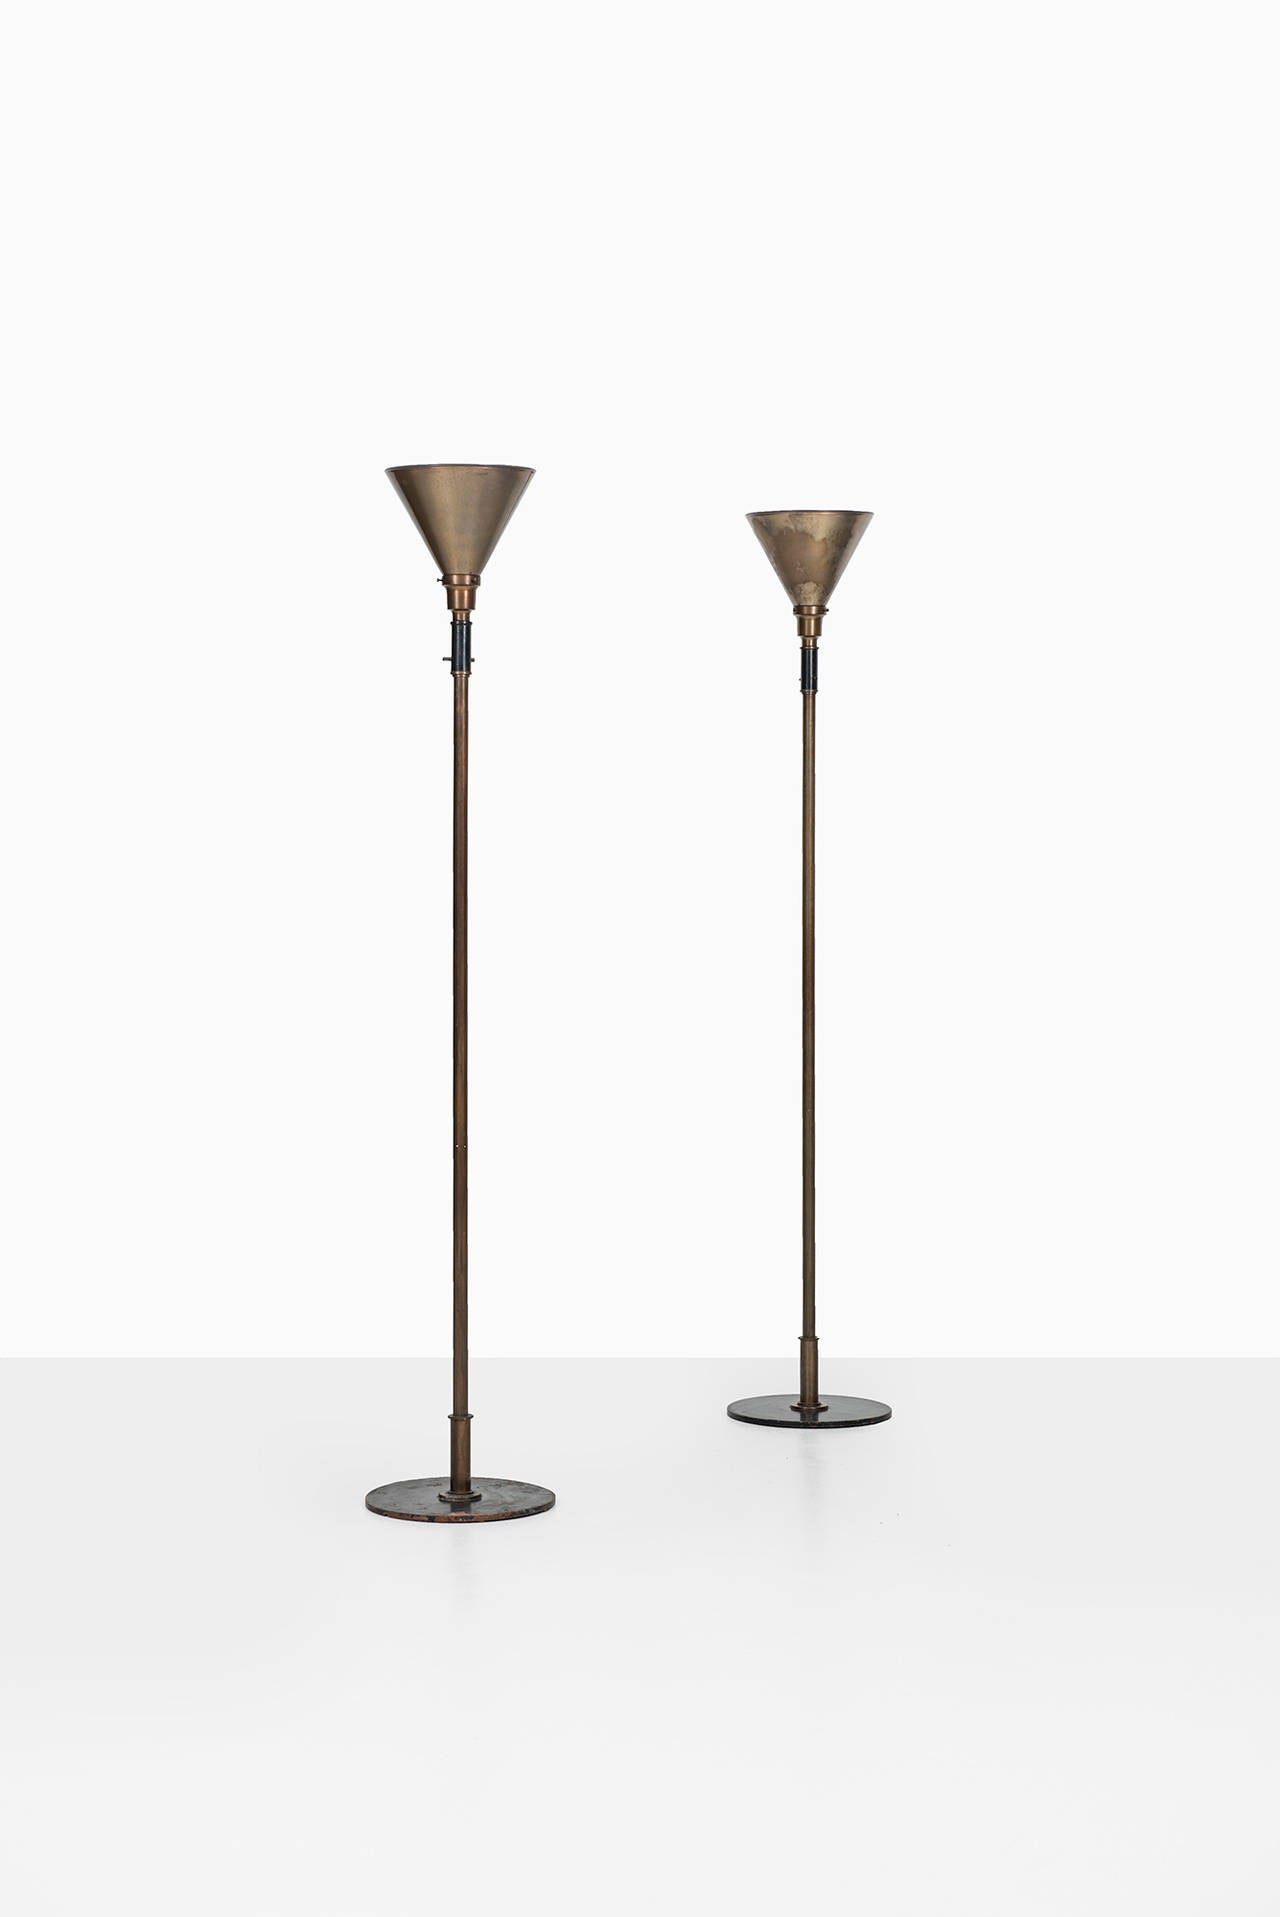 Rare Pair of Floor Lamps or Uplights from 1930s by Fog & Mørup in Denmark 1